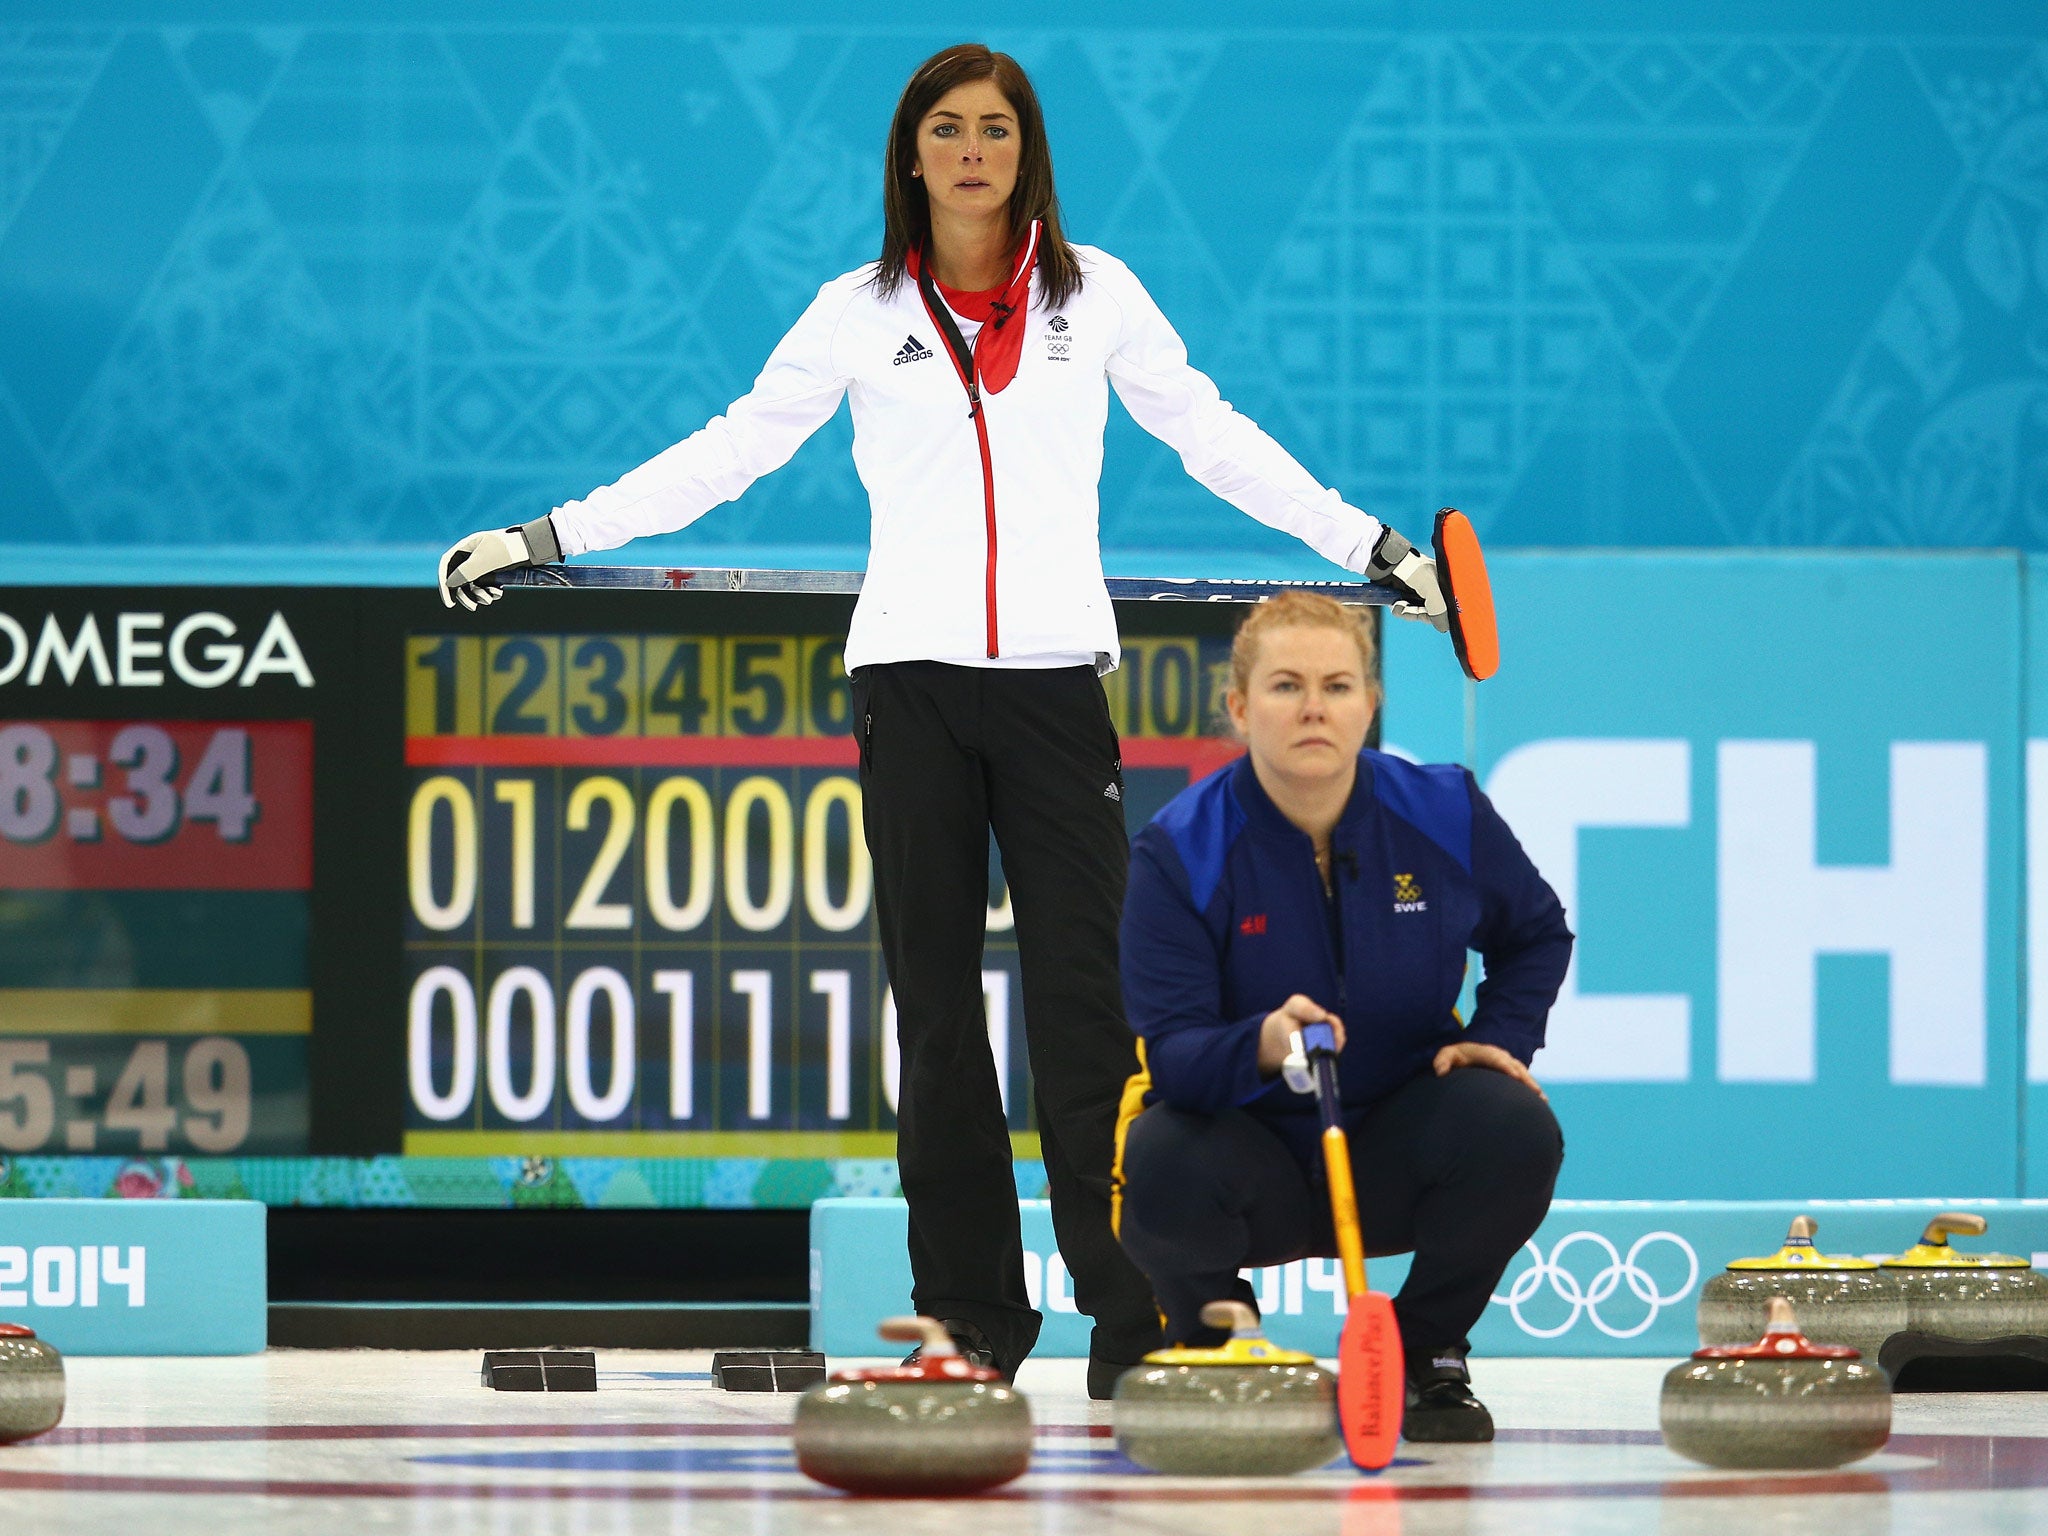 Eve Muirhead of Great Britain watches Margaretha Sigfridsson of Sweden during the round robin match against Sweden